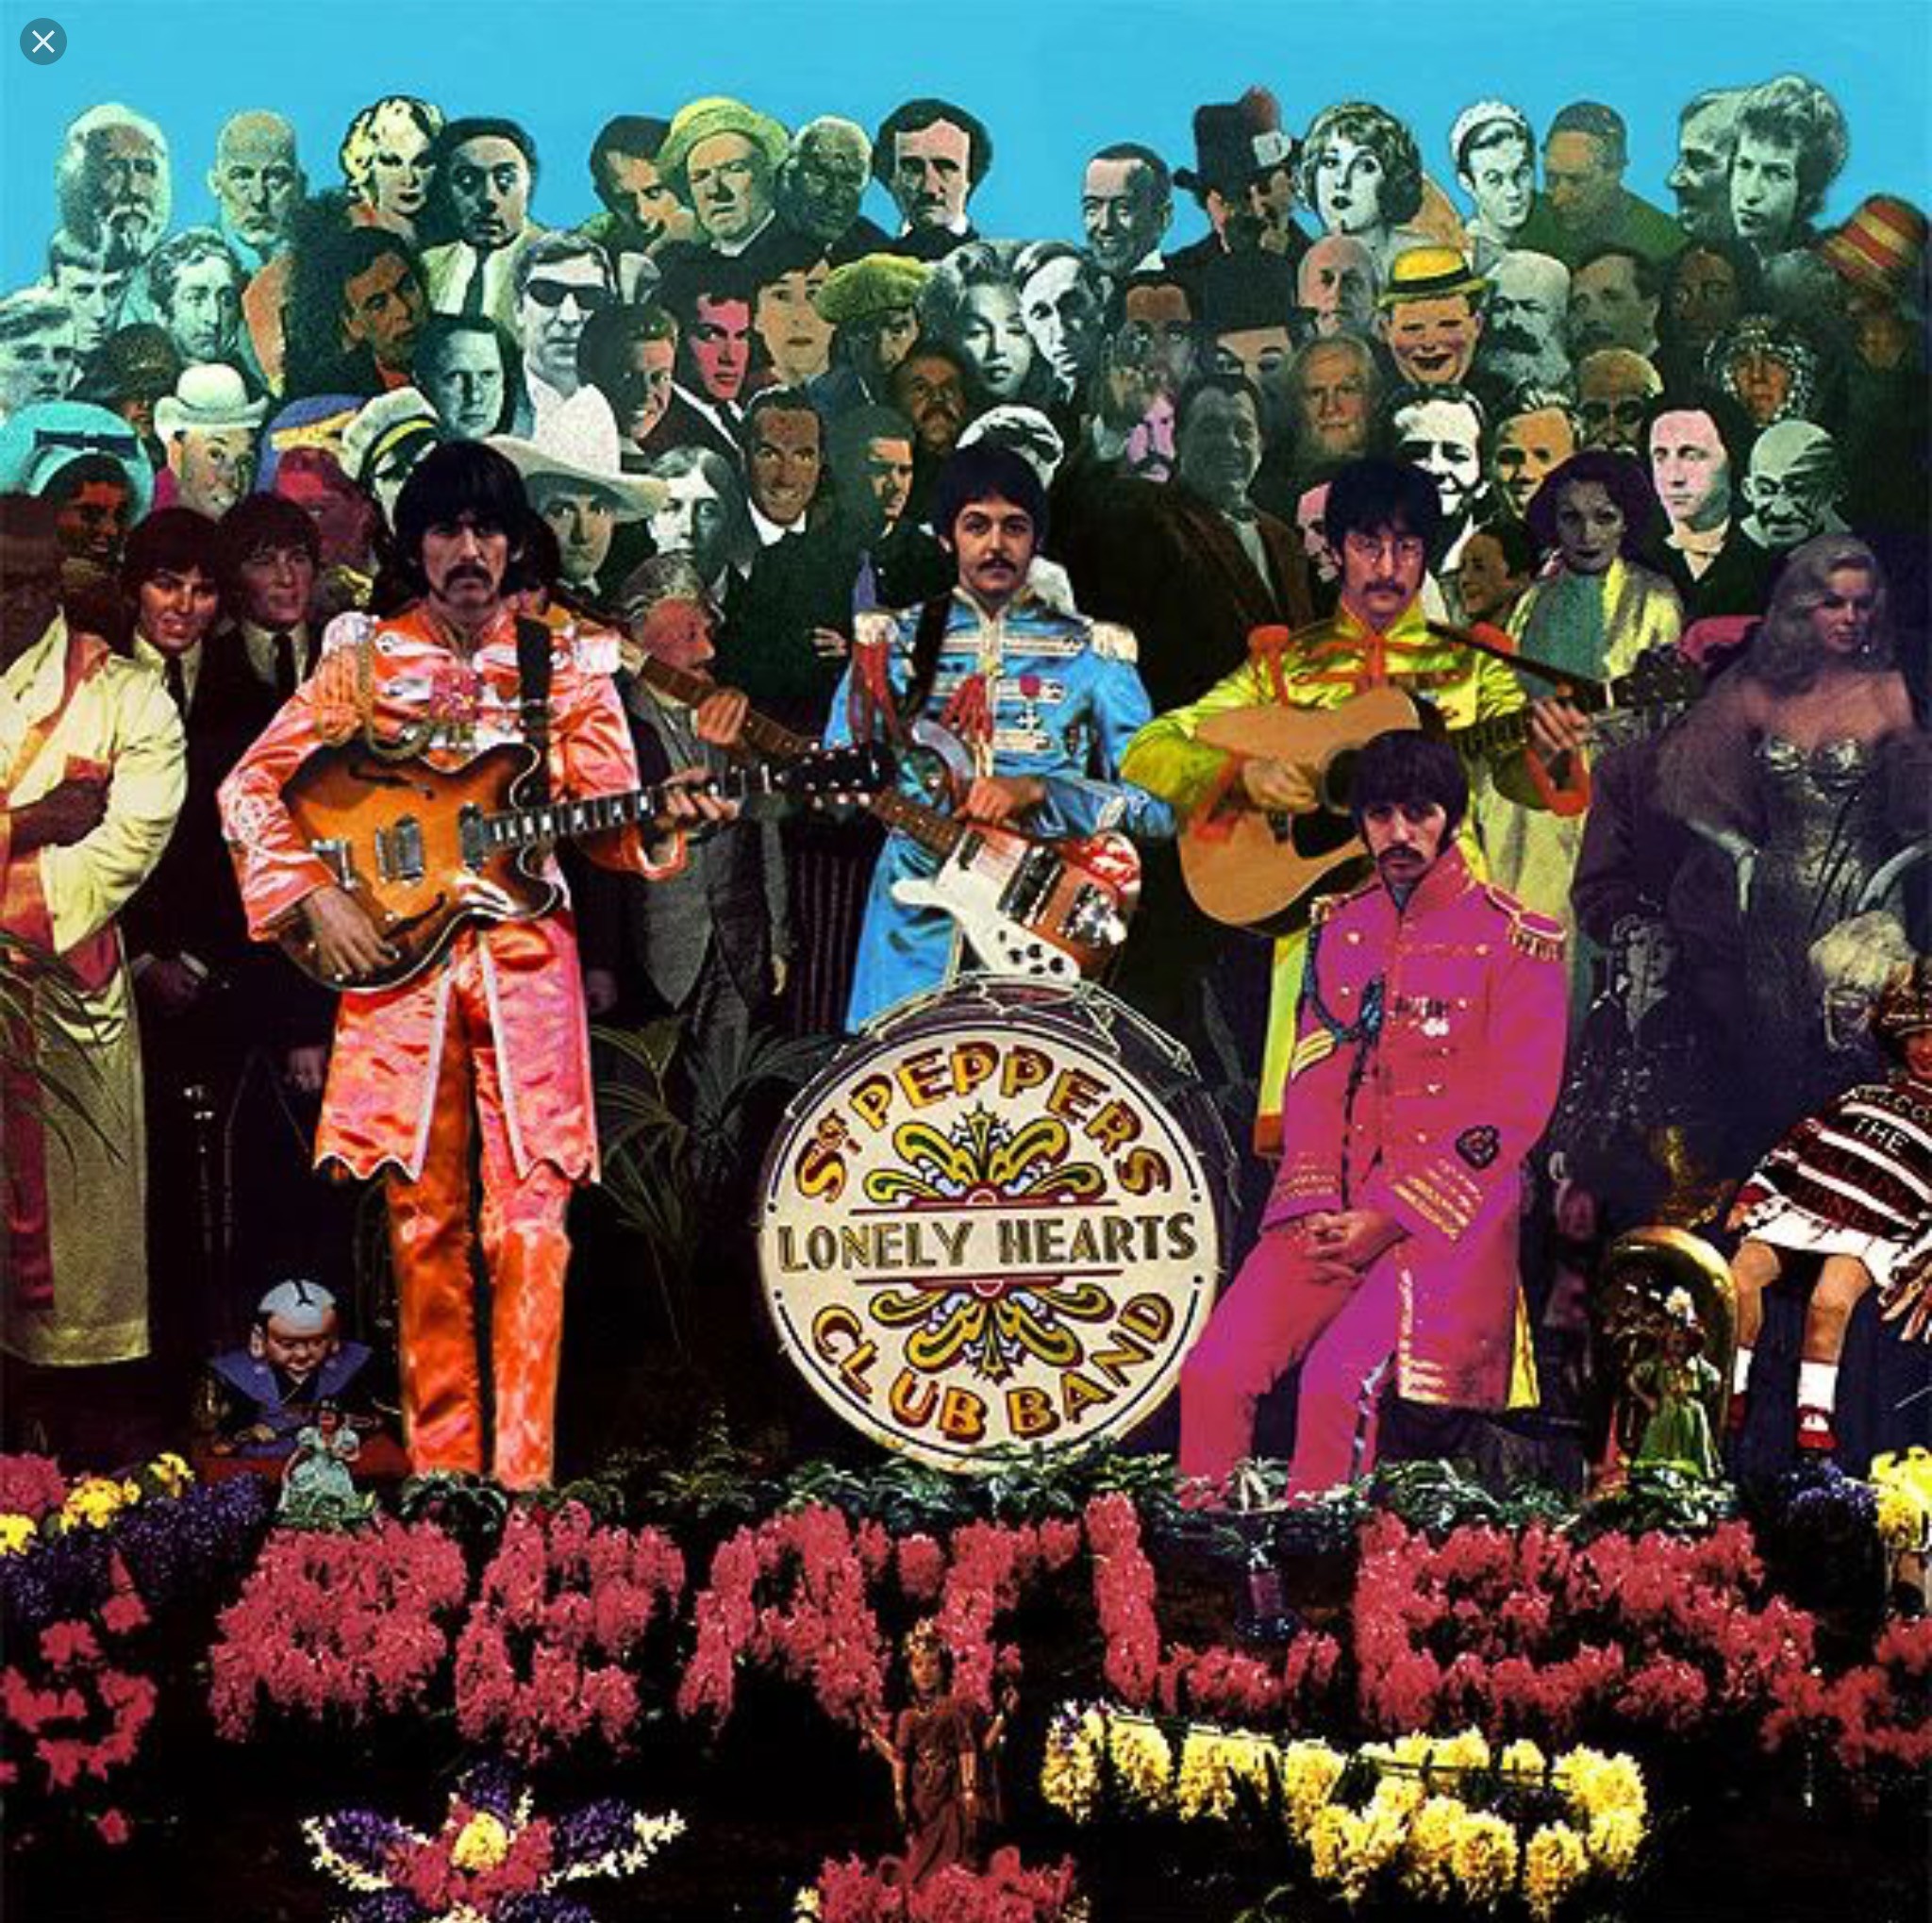 Beatles sgt pepper lonely. The Beatles сержант Пеппер. Обложка Битлз сержант Пеппер. The Beatles Sgt. Pepper's Lonely Hearts Club Band 1967. Битлз Sgt Pepper s Lonely Hearts Club Band.